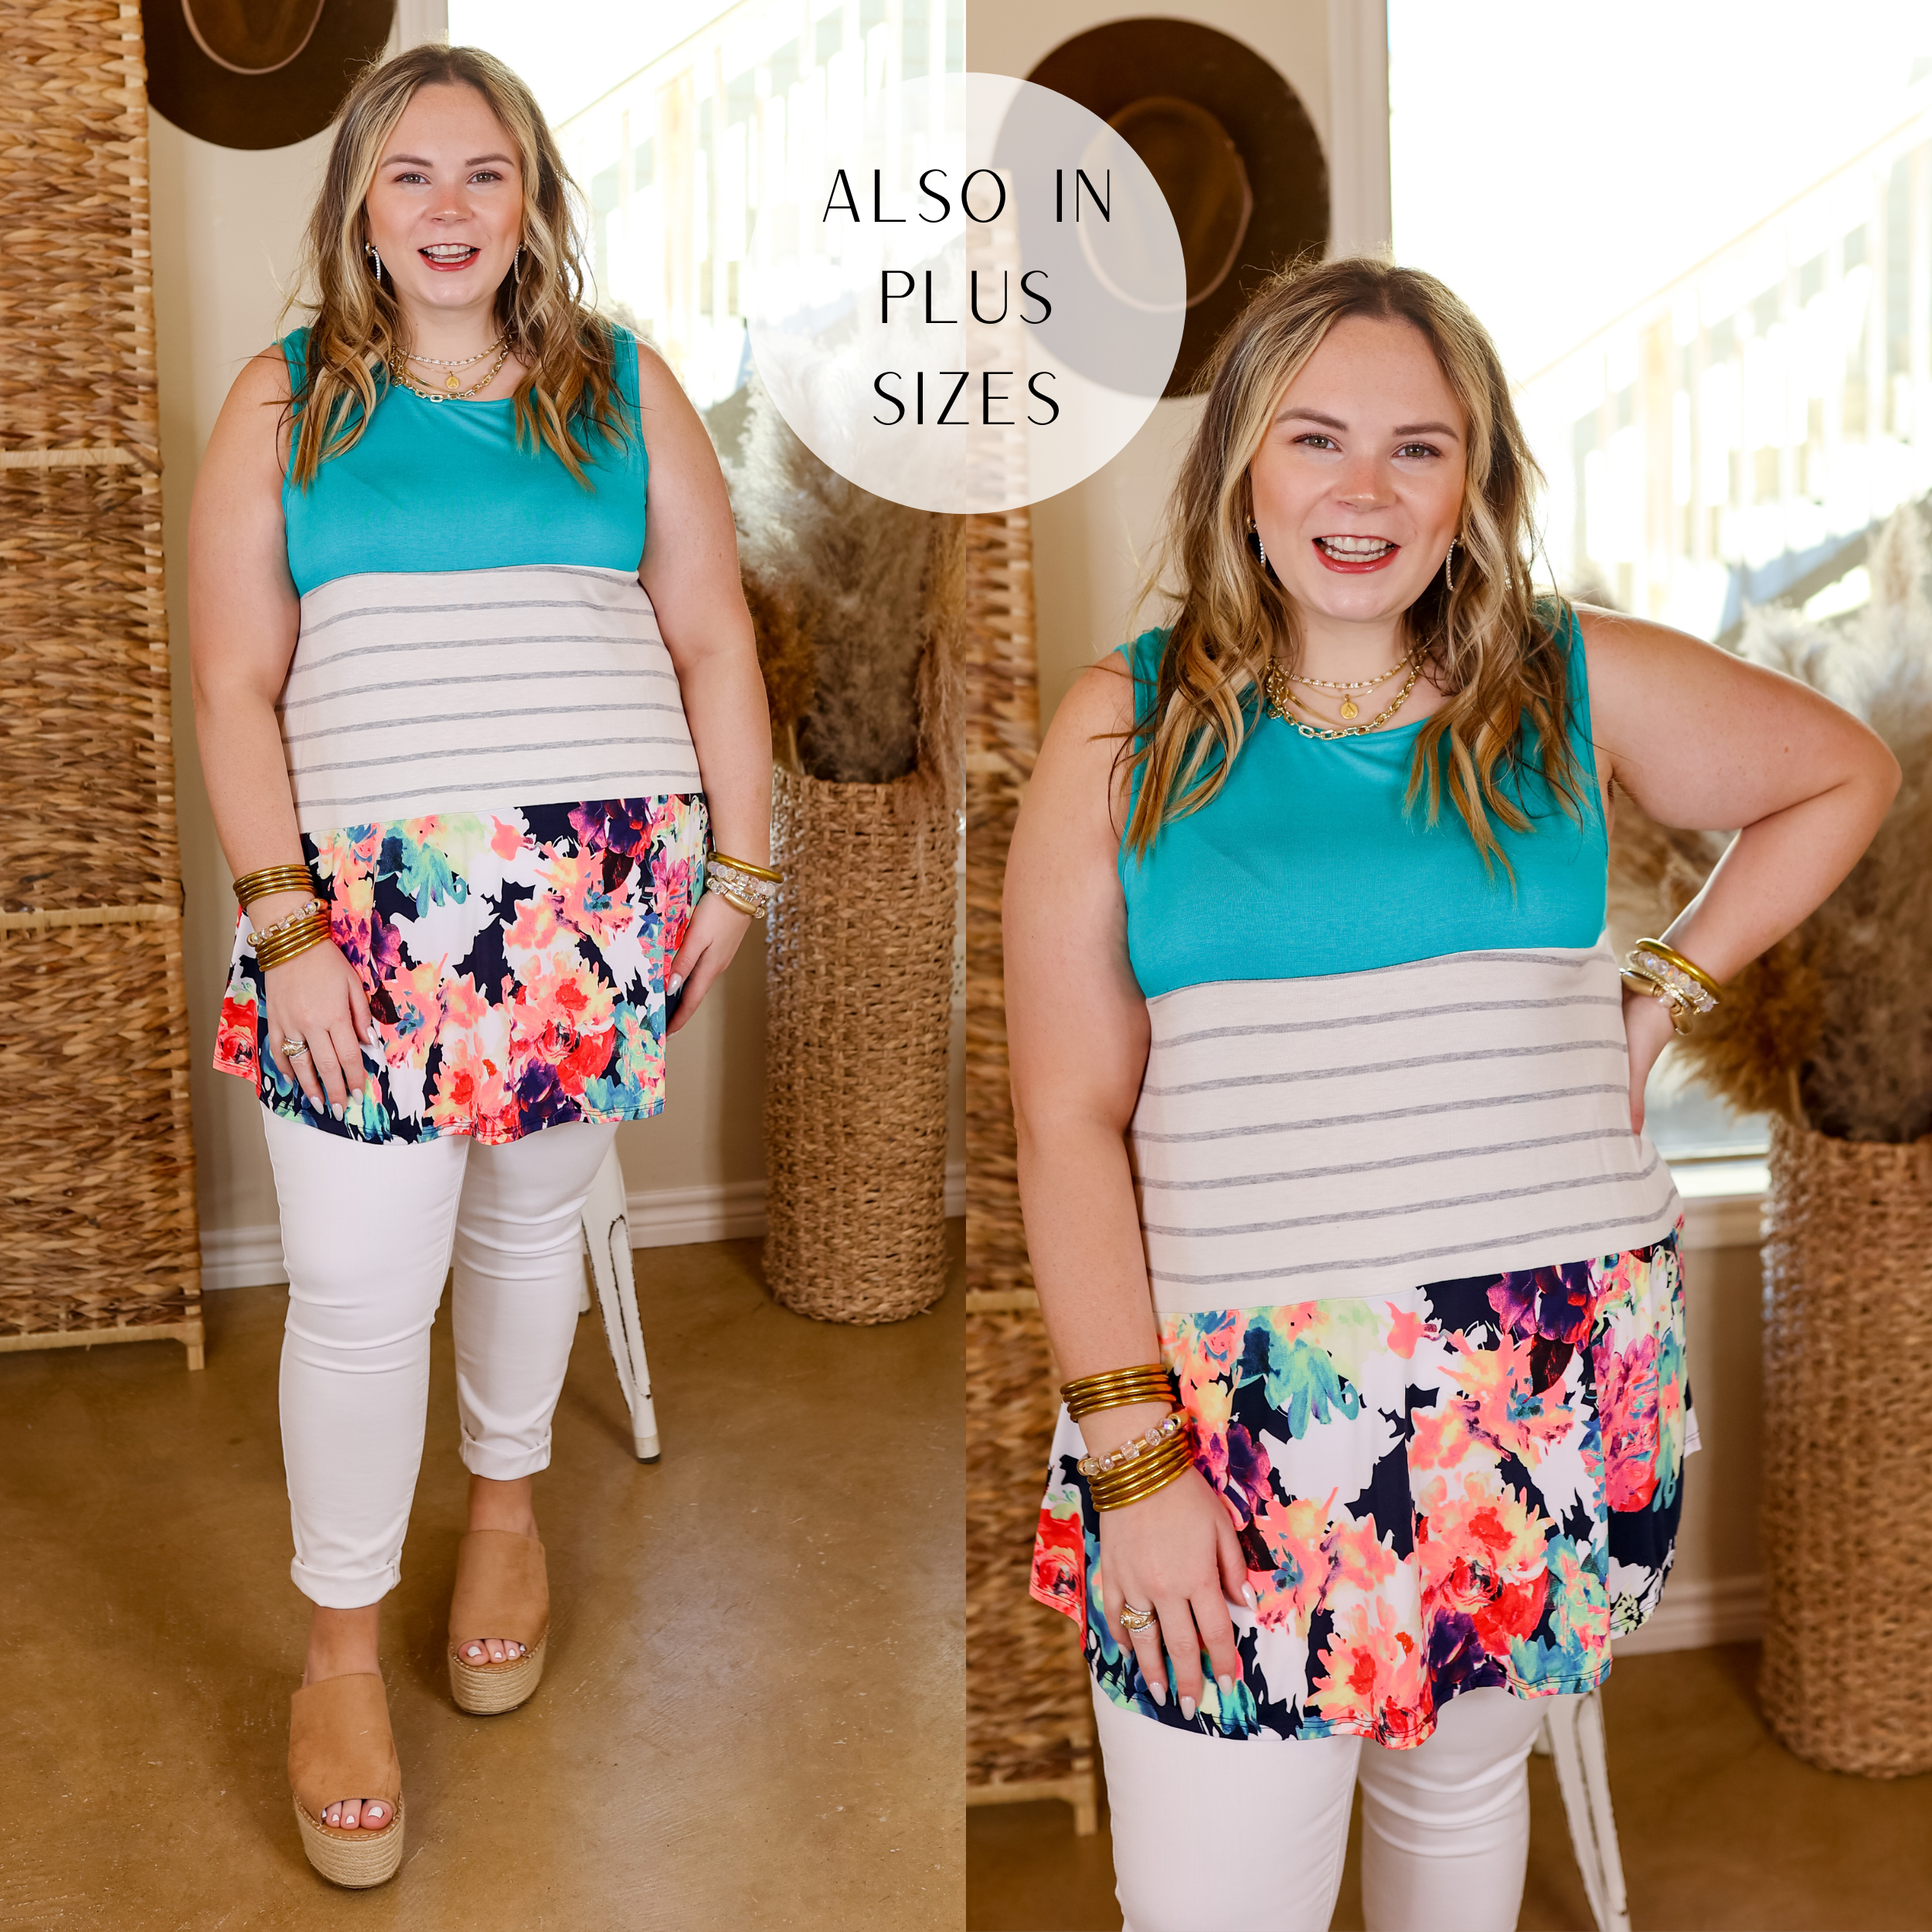 Model is wearing a tank top with 3 different horizontal color blocks including turquoise, stripes, and a floral print. Model has this top paired with white jeans, nude wedges, and gold jewelry. 